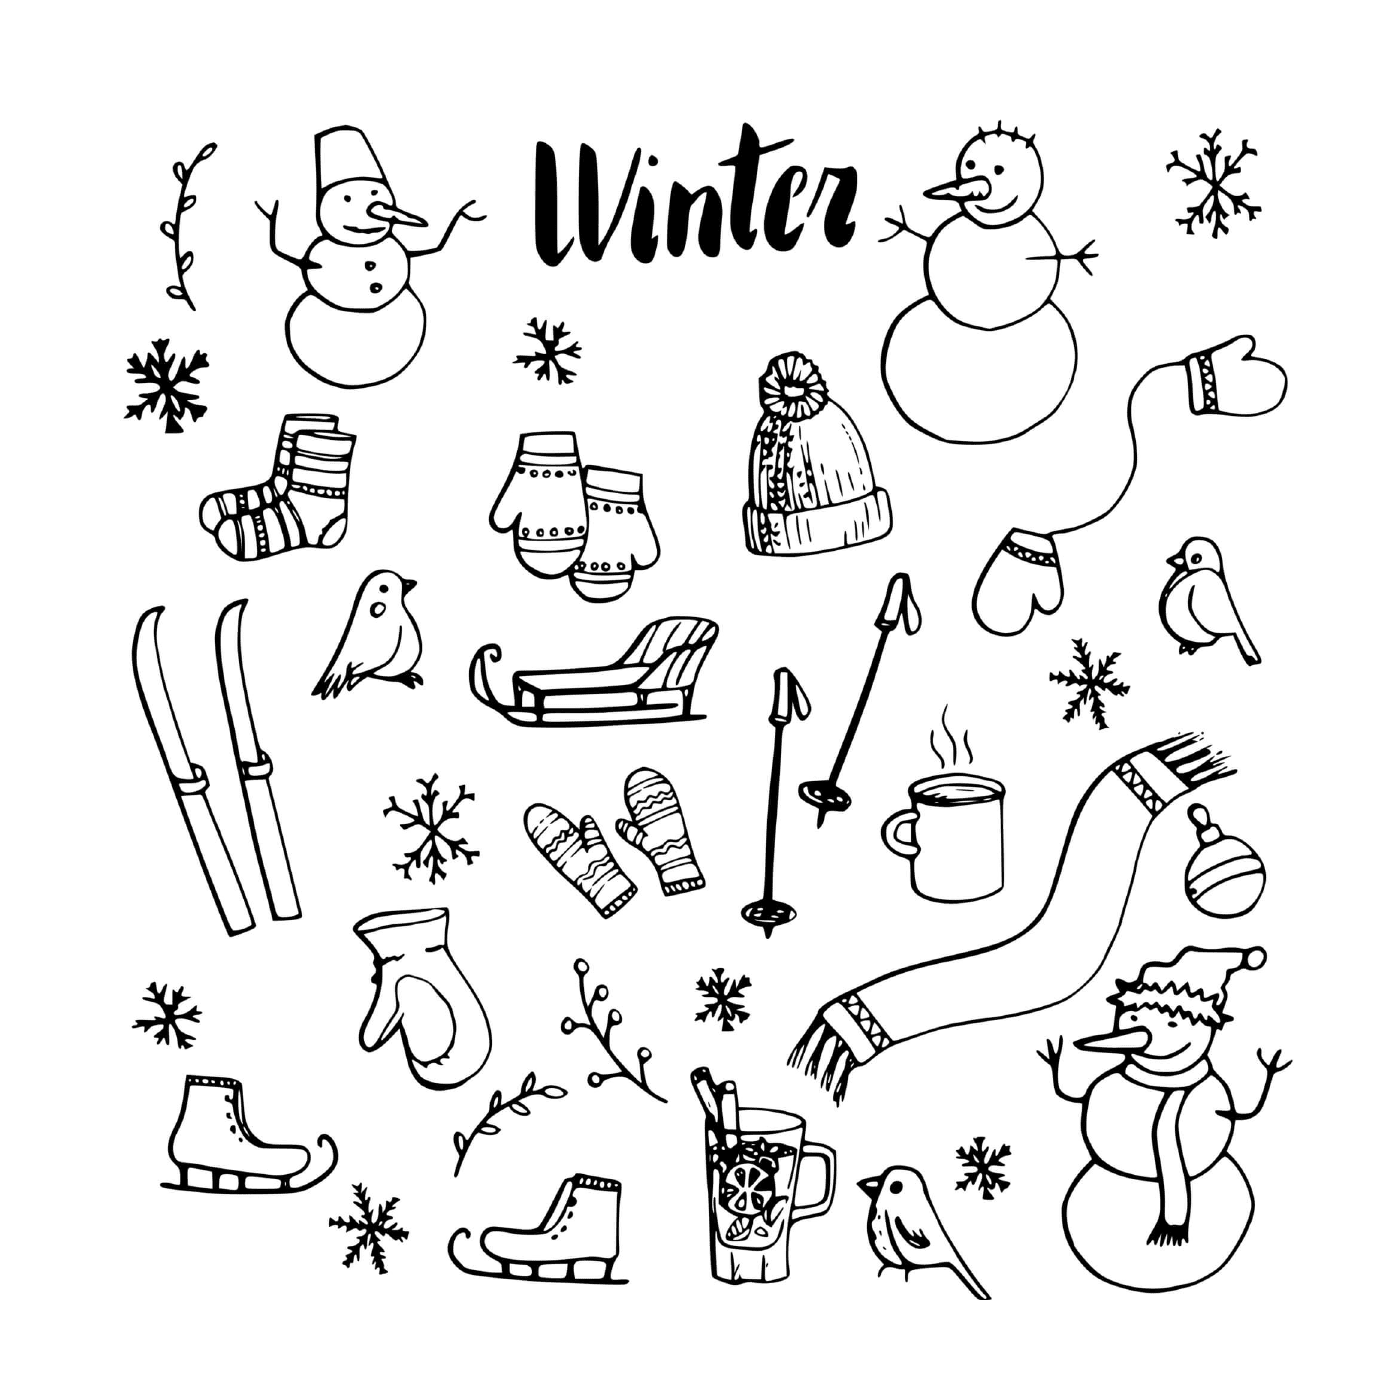  Set of winter icons 